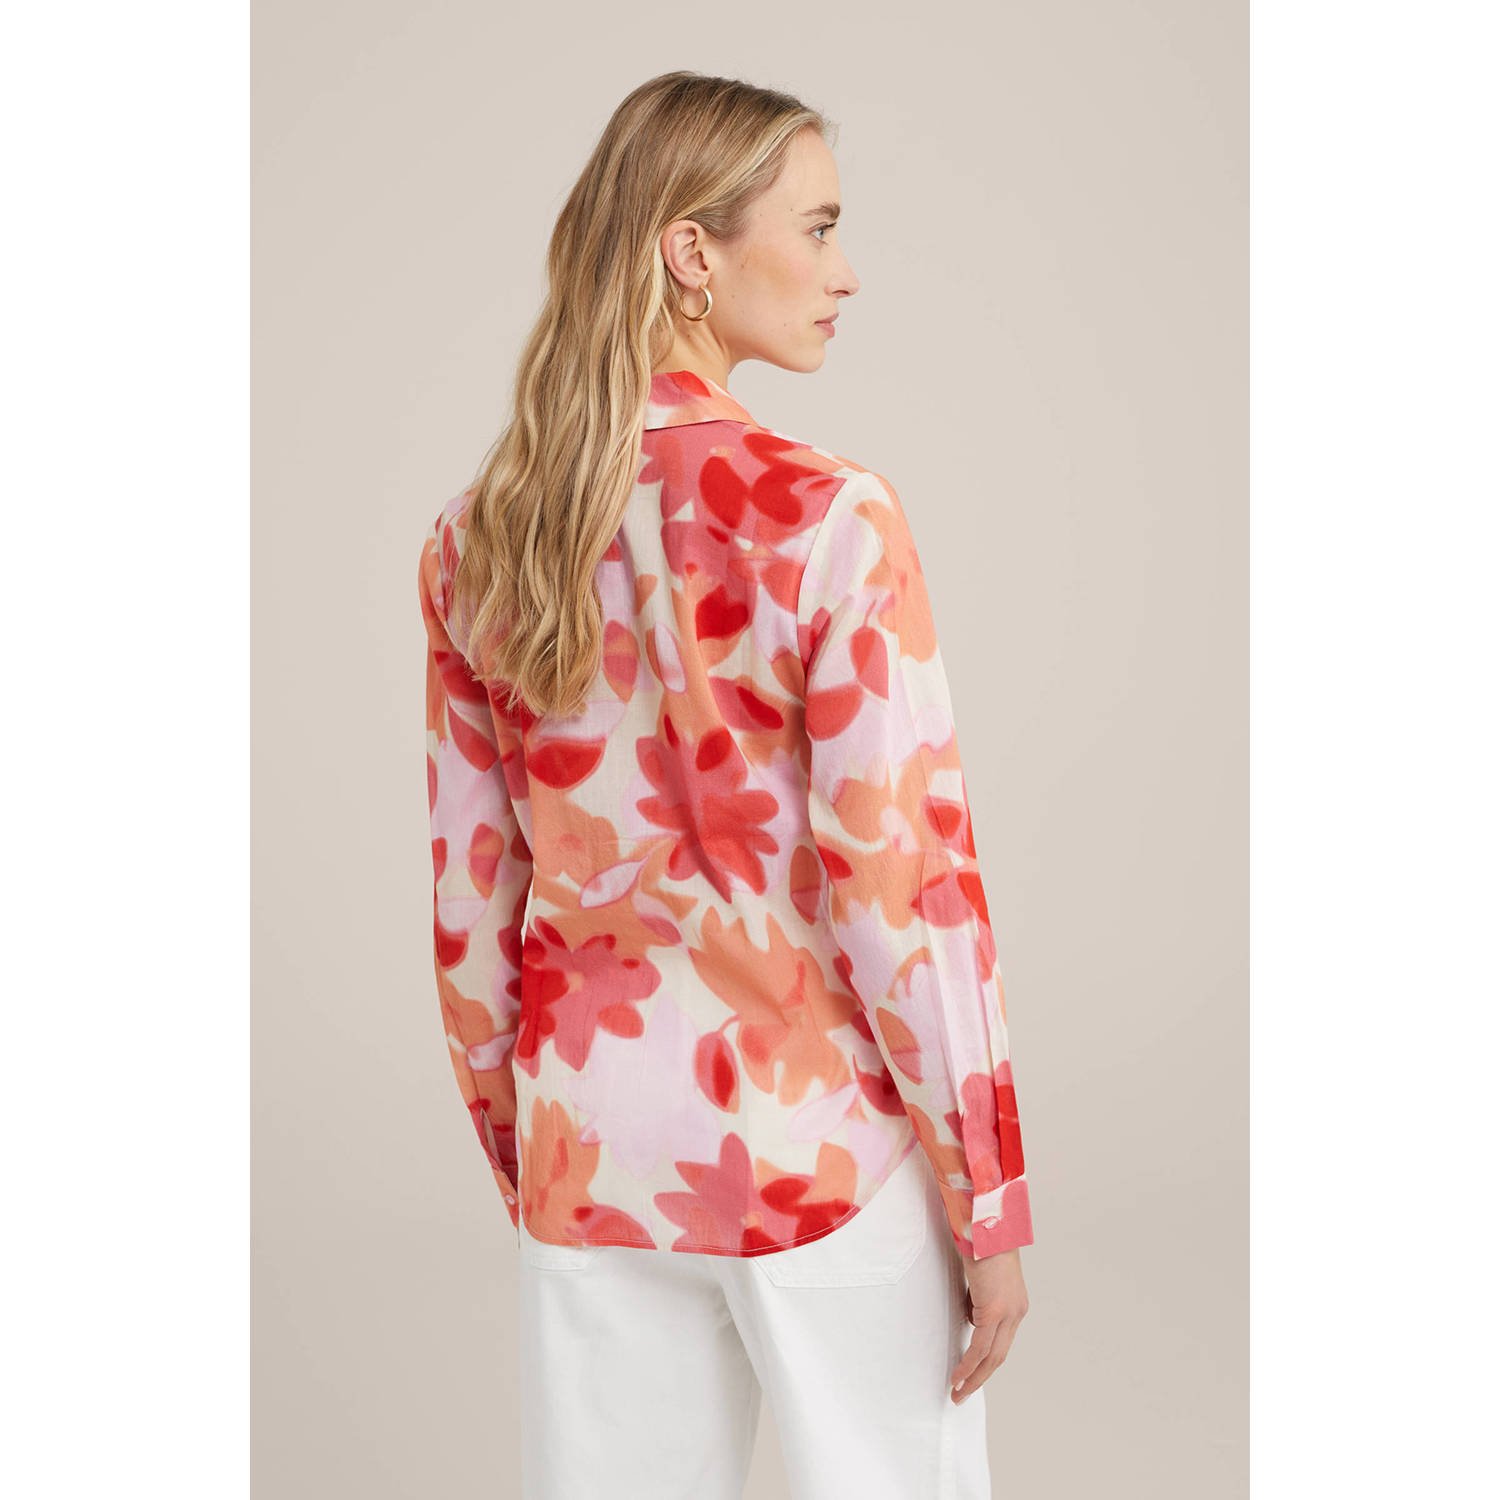 WE Fashion blouse met all over print rood roze oranje